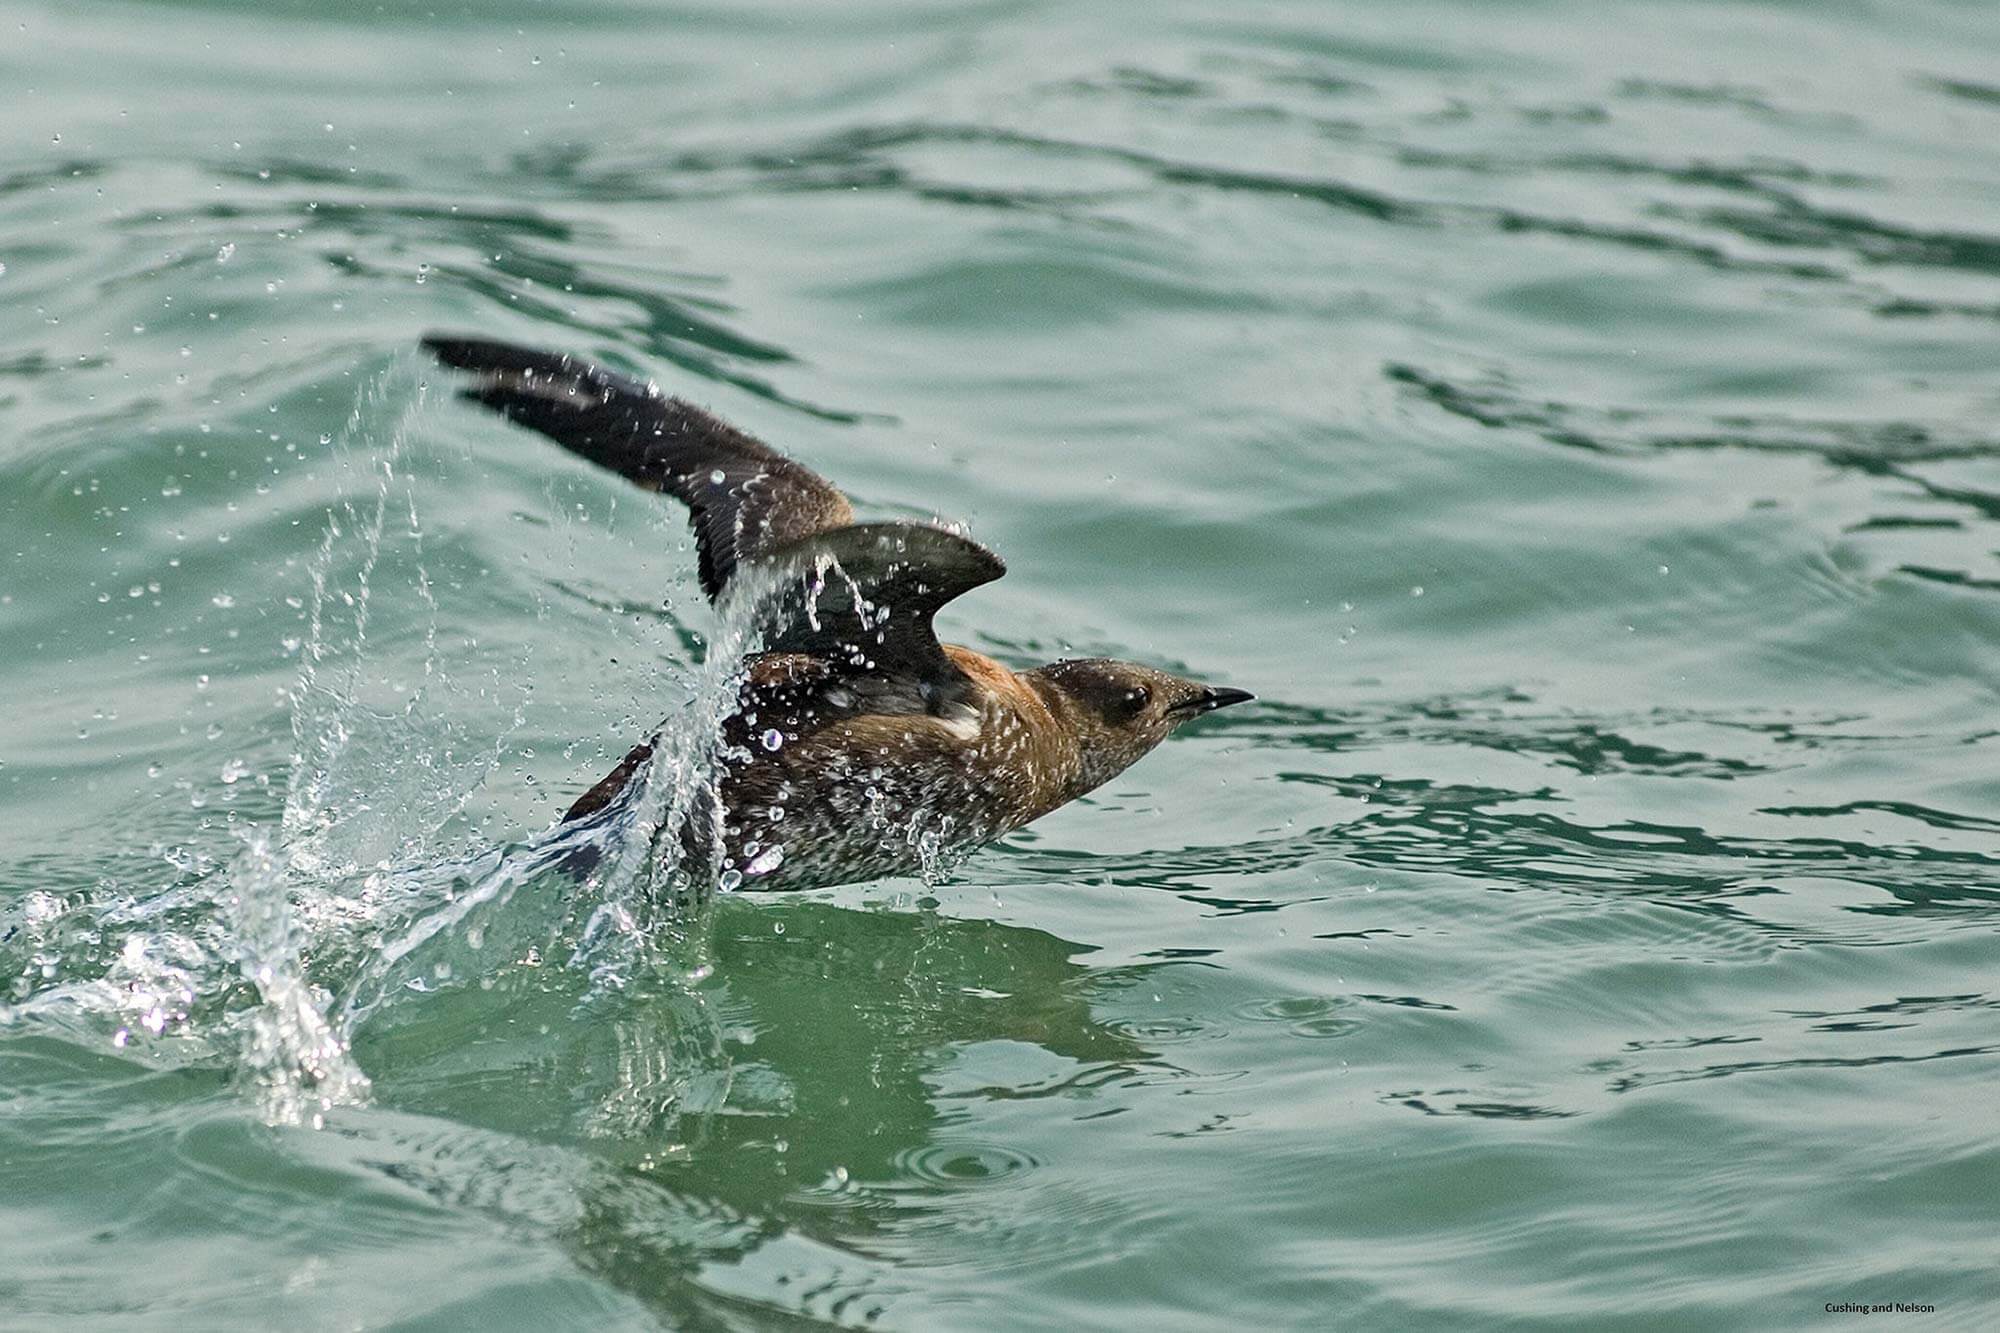 A marbled murrelet with brown feathers mid-flap taking off from the sea, by Kim Nelson and Dan Cushing